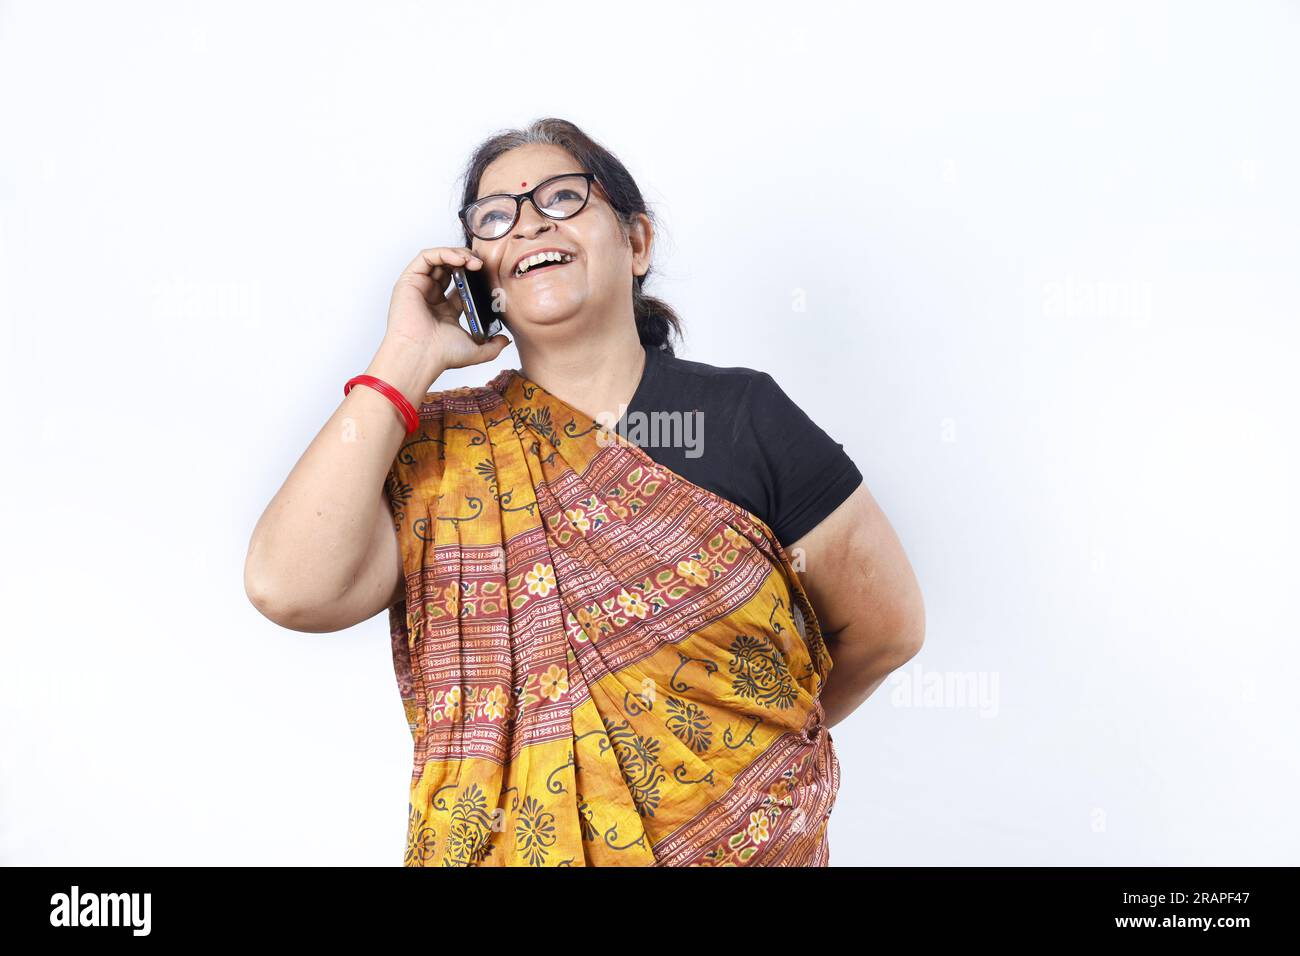 Rural Indian old woman wearing saree portraying various expressions on phone. She is holding a mobile phone. Go digital concept in rural India. Stock Photo